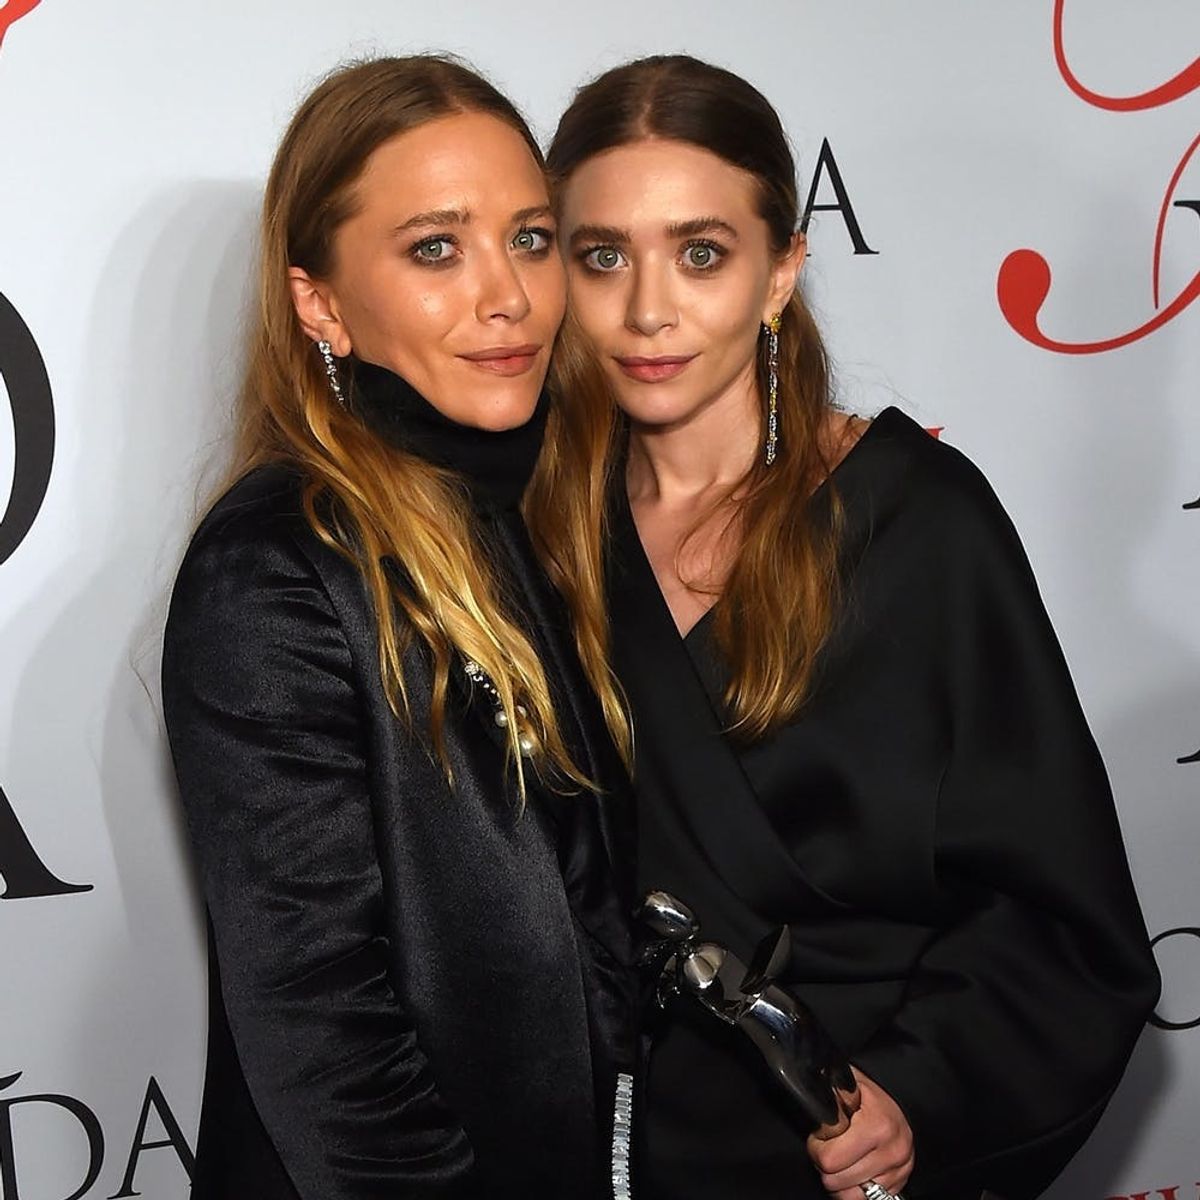 This Art Exhibit of the Olsen Twins Hiding from the Paparazzi Lives Up to Its Very Real Hype